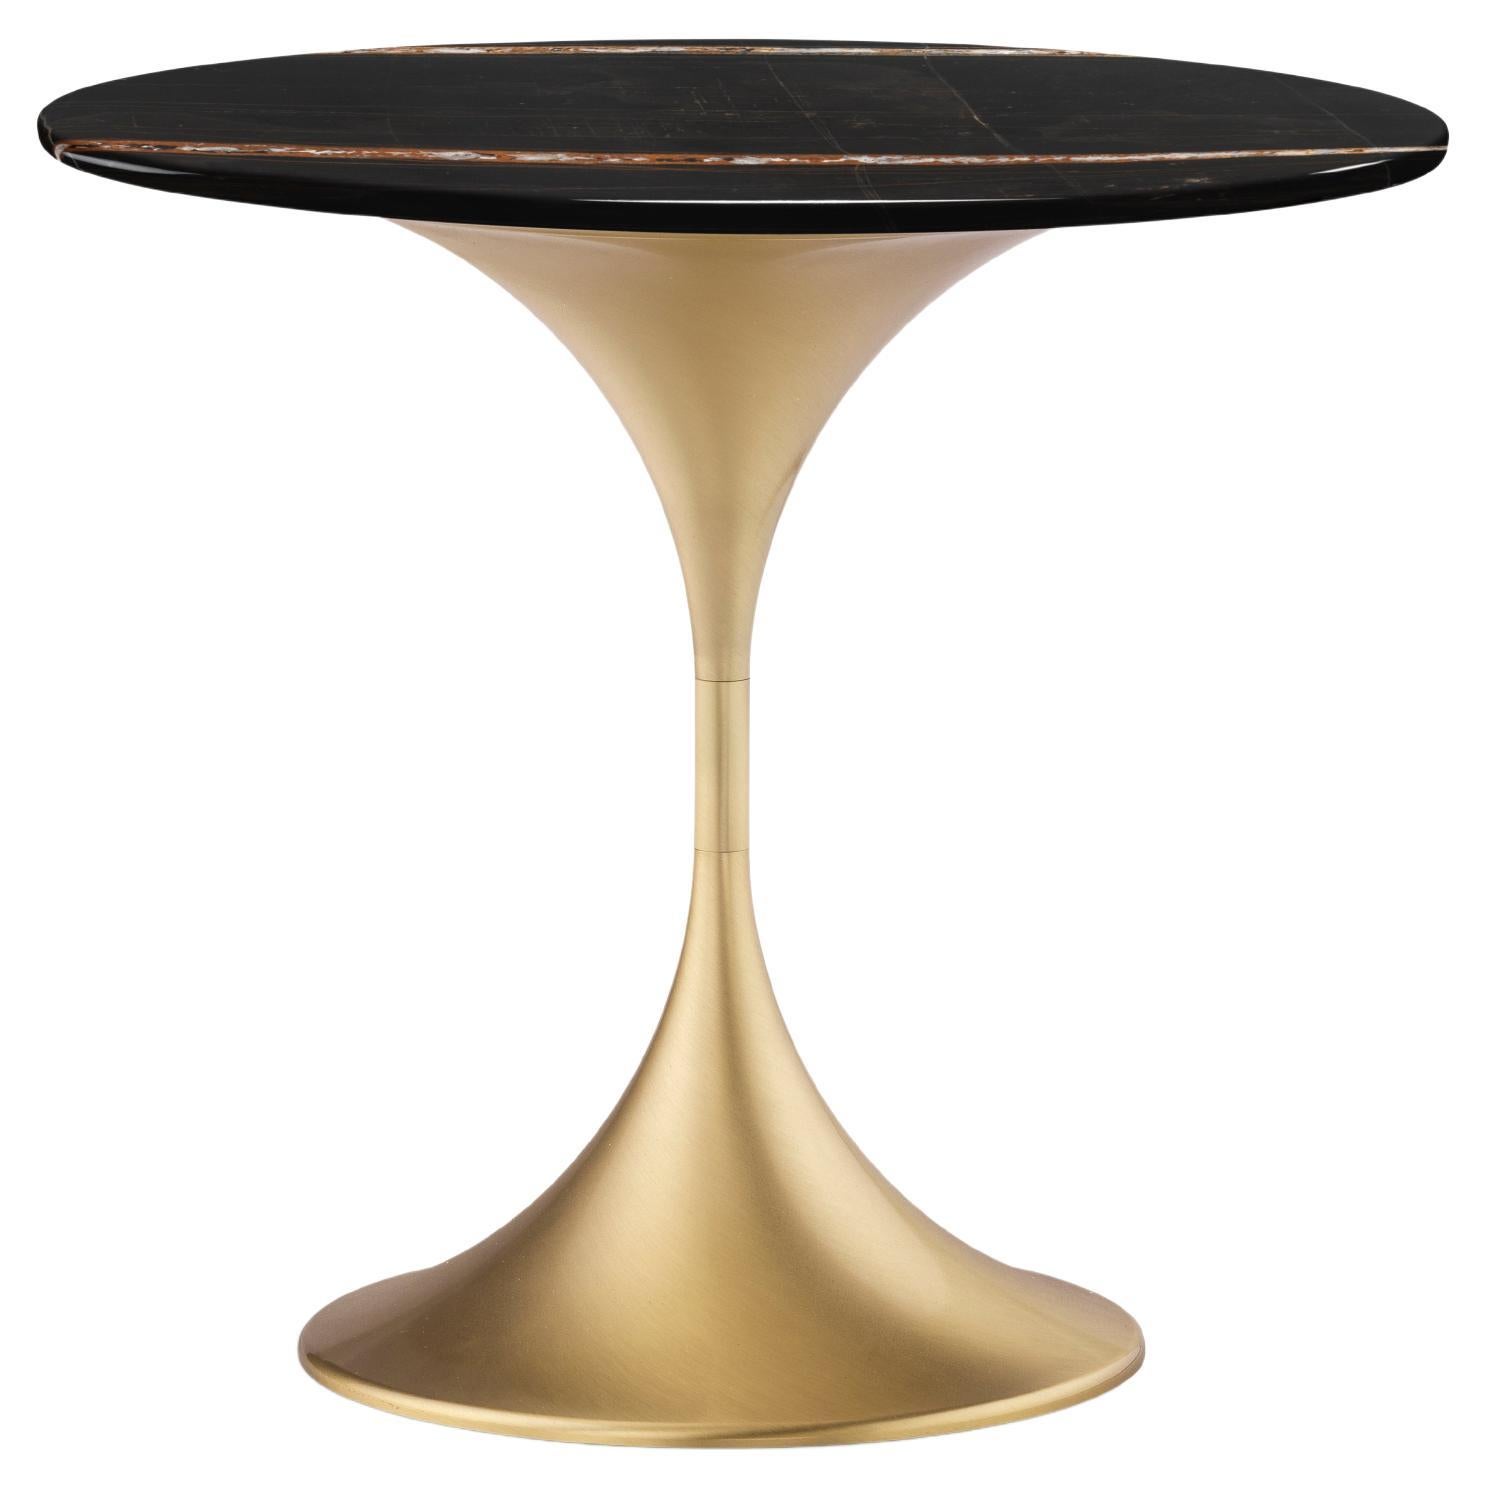 Dapertutto Short Table, Sahara Noir Top, Satin Brass , Made in Italy For Sale